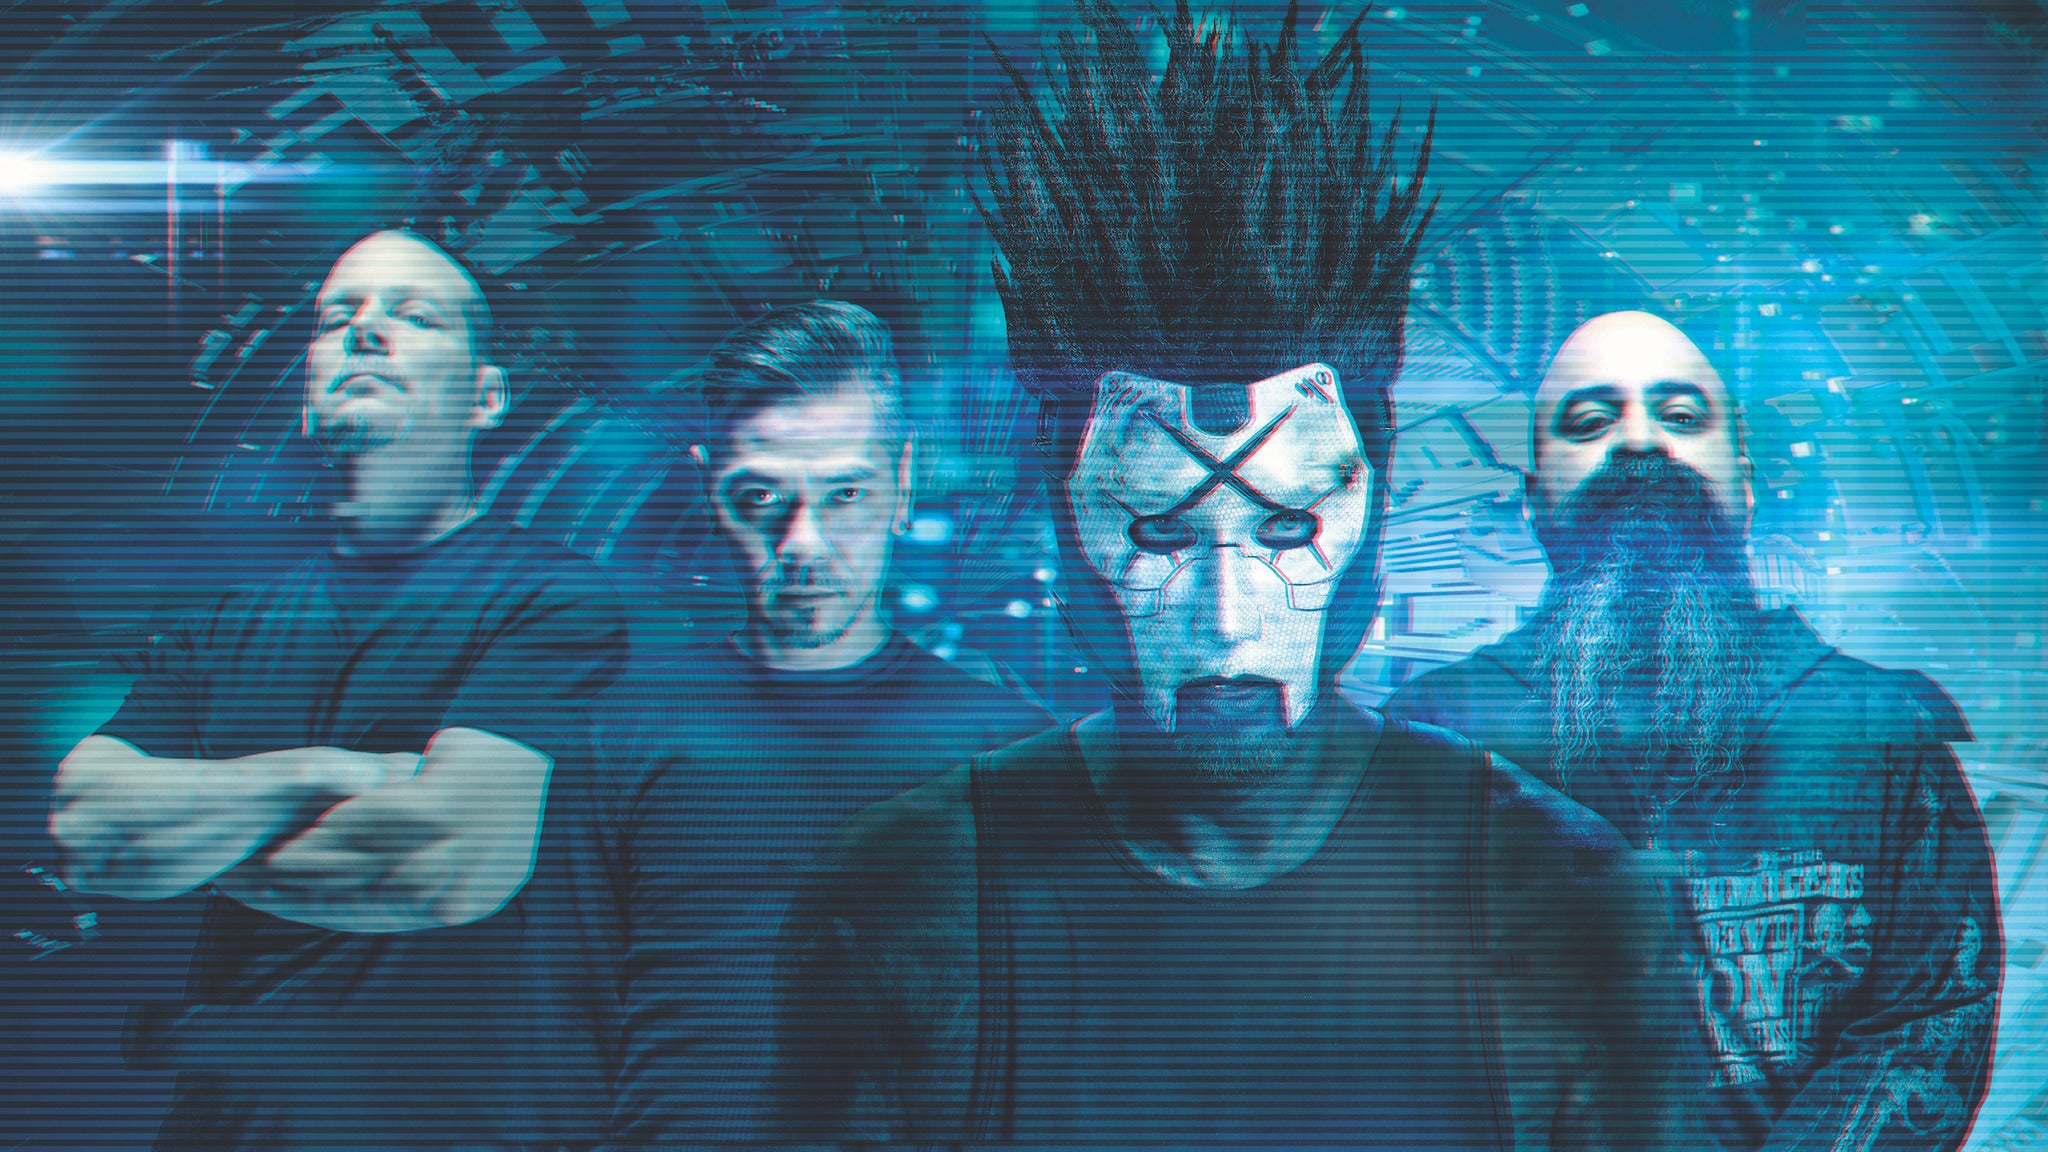 Static-X – Rise Of The Machine 2023 presented by 96ROCK